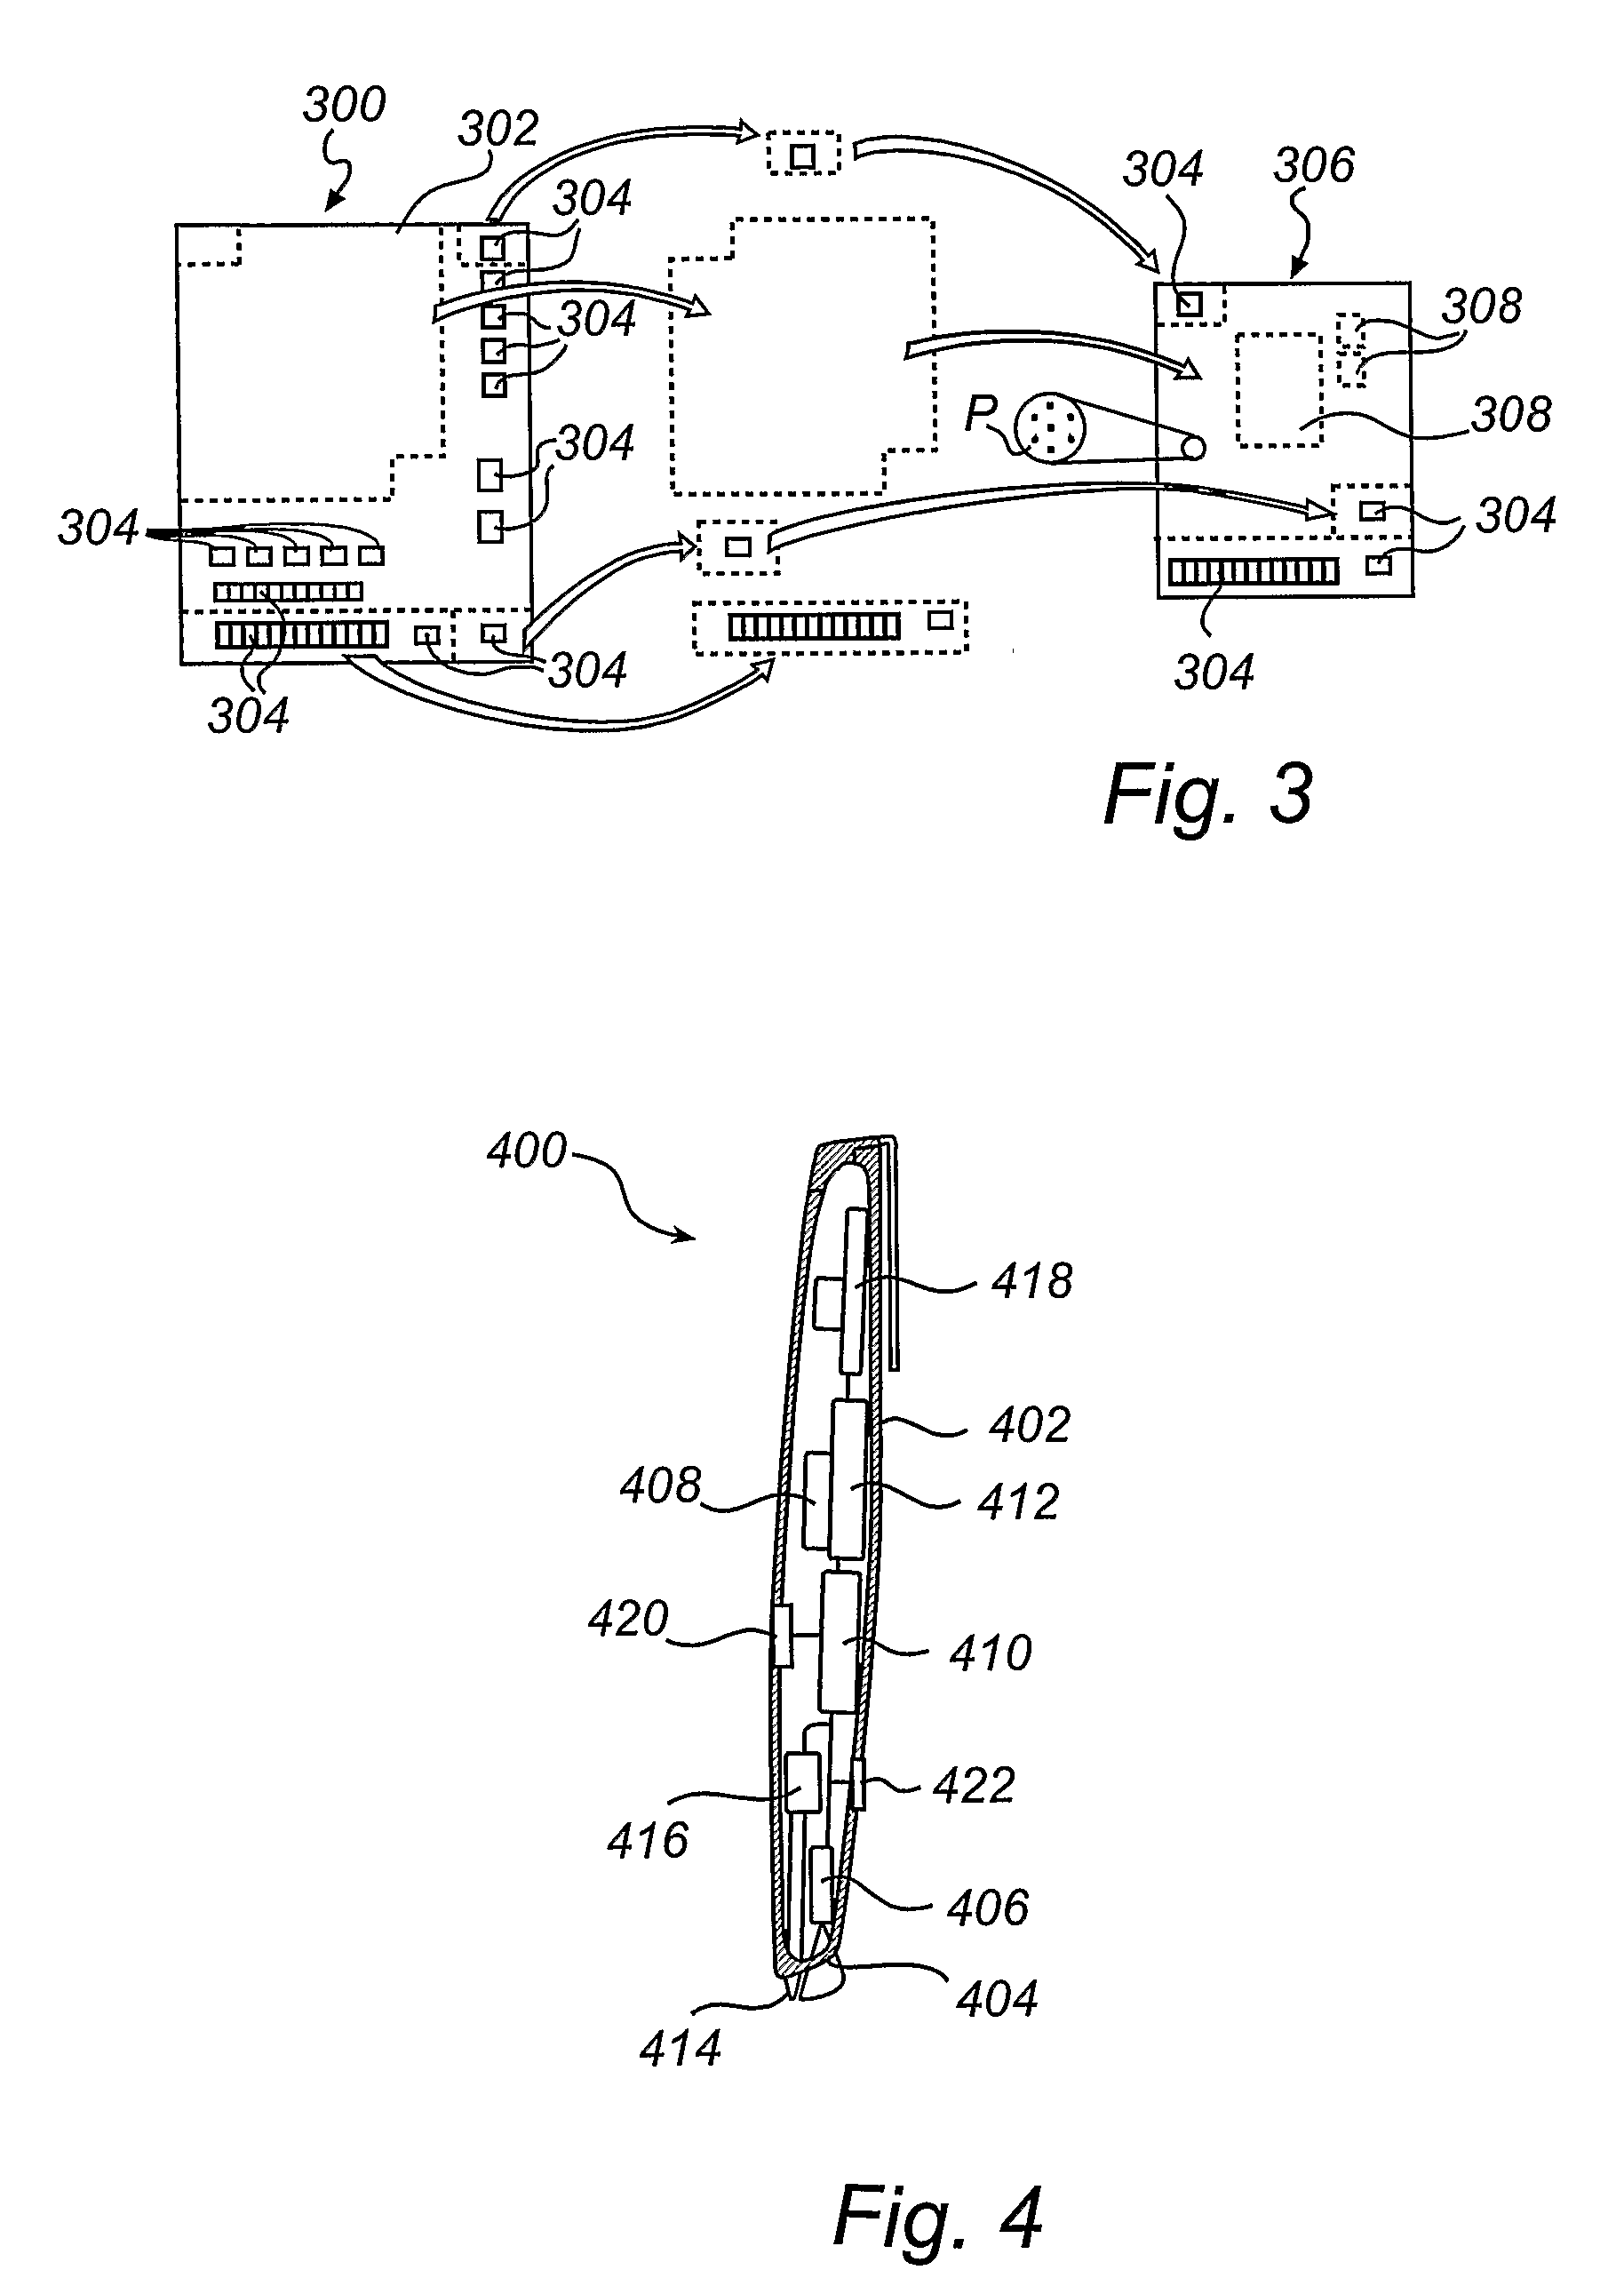 Management of Internal Logic for Electronic Pens